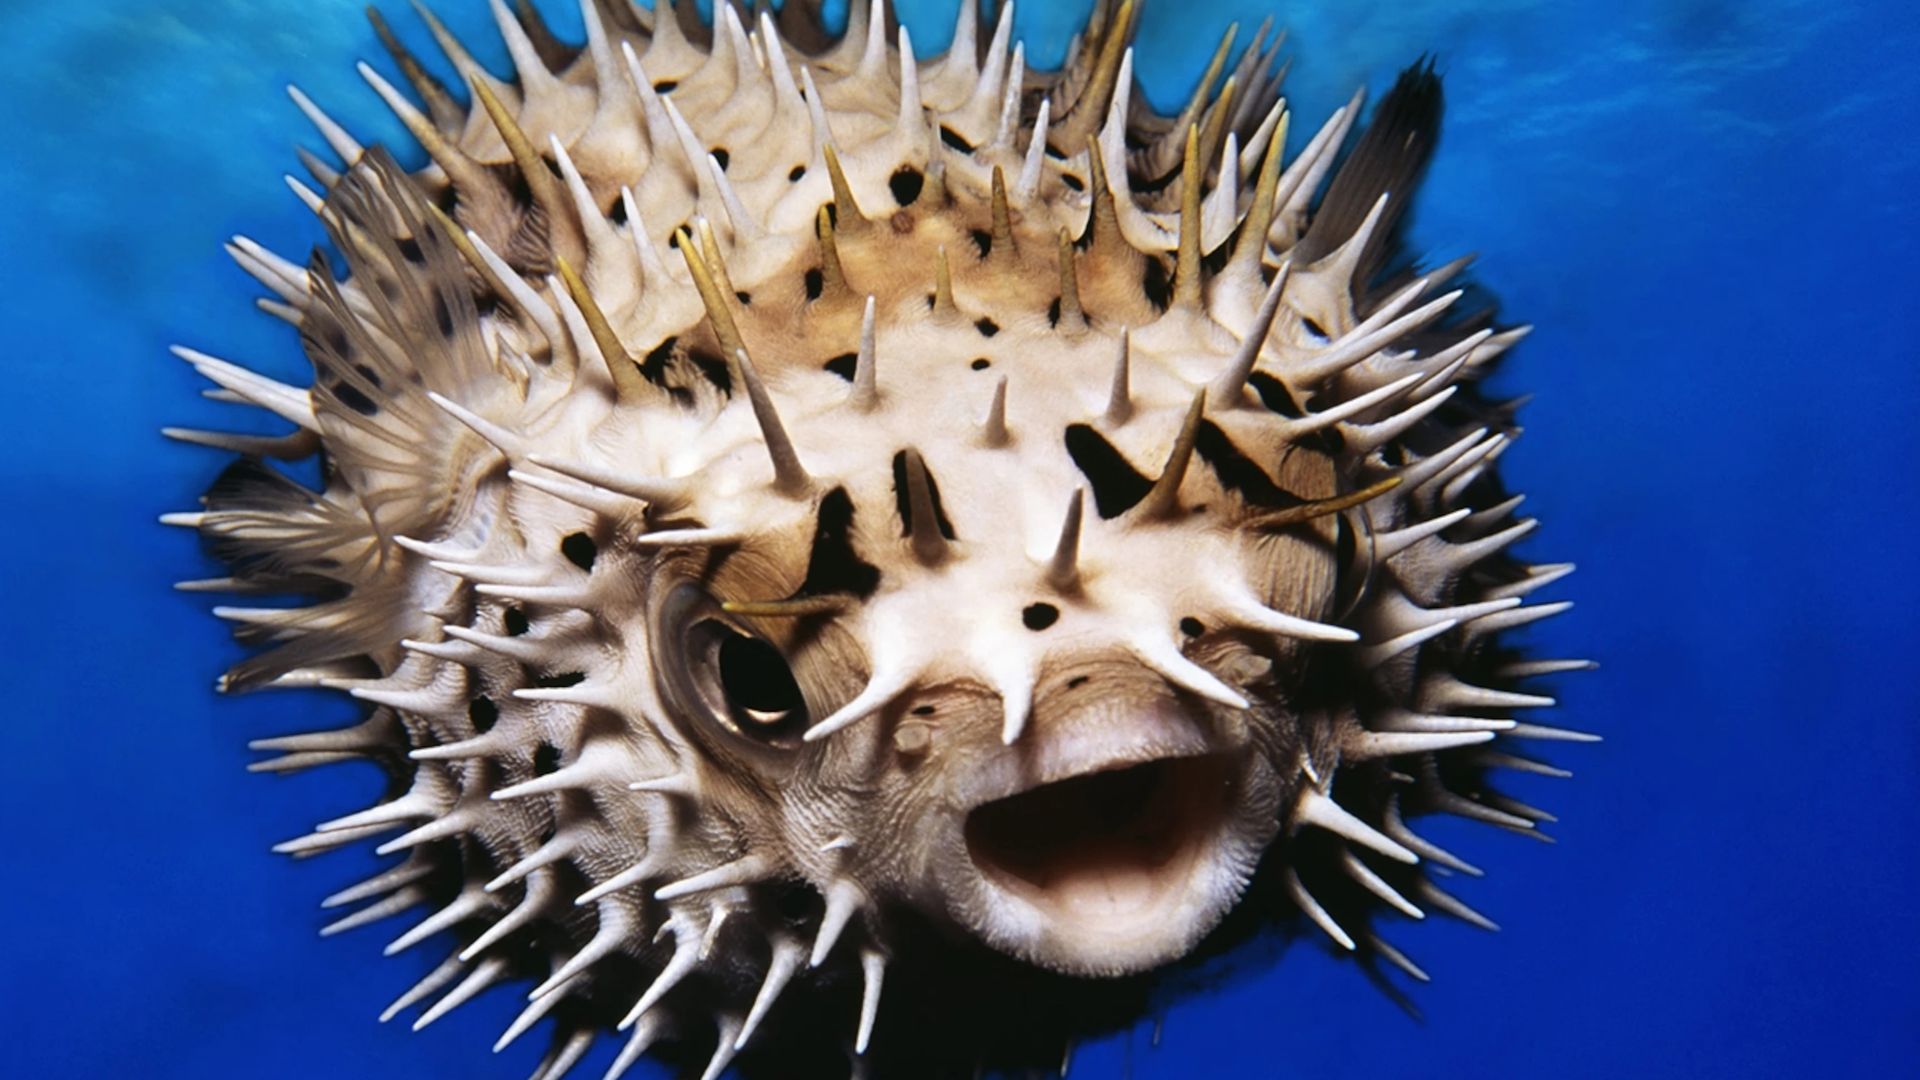 Front View Of Blowfish With Its Spikes